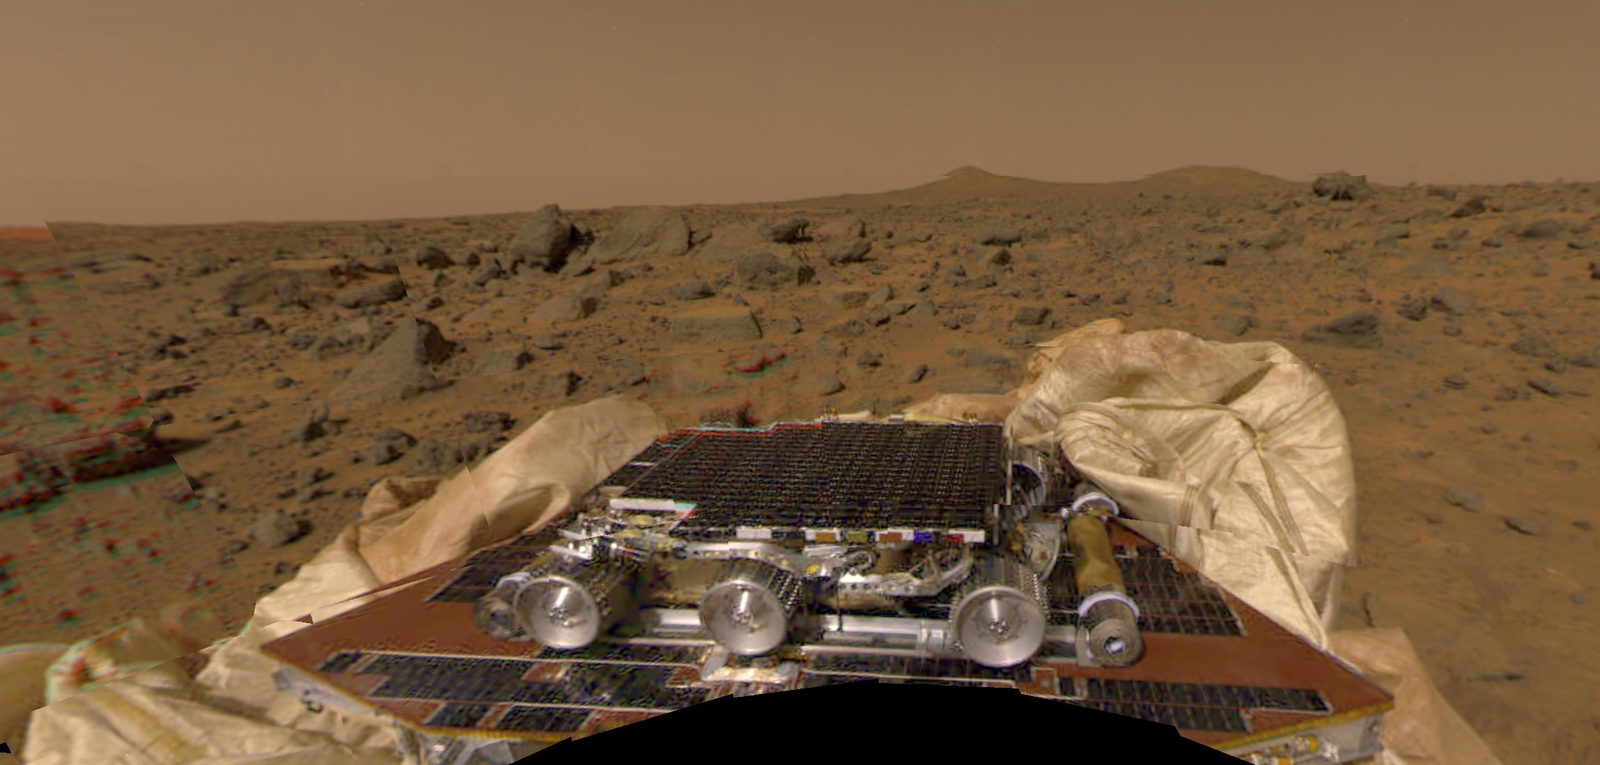 Jamming with the 'Spiders' from Mars – NASA Mars Exploration